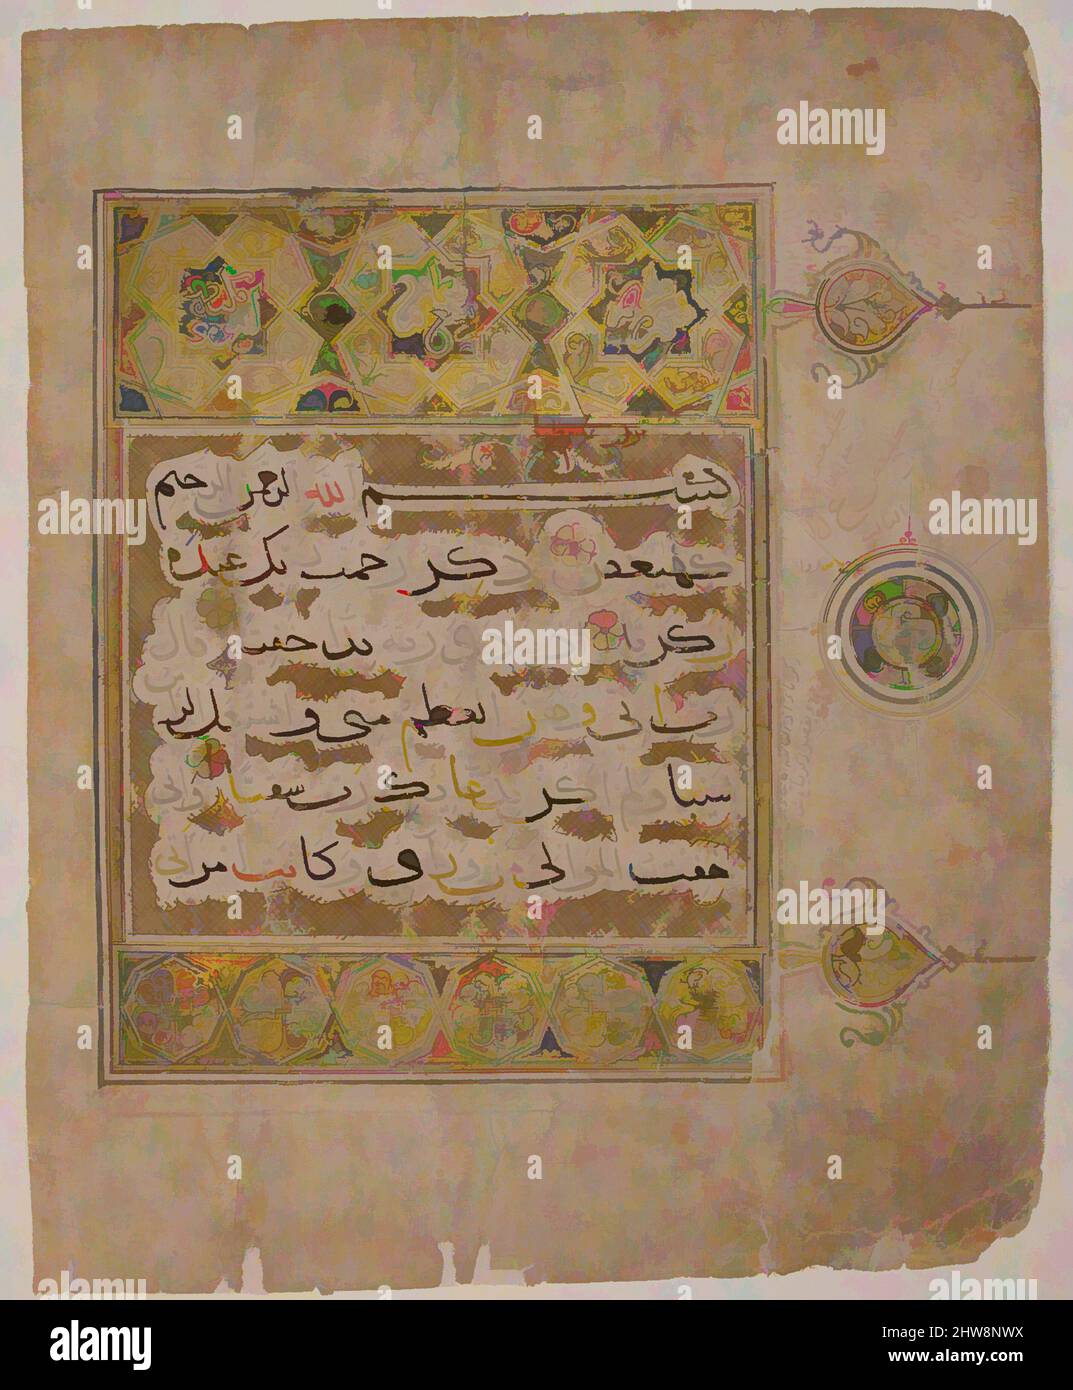 Art inspired by Folio from a Qur'an Manuscript with Verses from the Surat al-Maryam, 14th century, Made in Egypt or Syria, Ink, opaque watercolor, and gold on paper, Ht. 13 in. (33 cm), Codices, In these folios from a Mamluk Qur’an manuscript, verses are written in a black ink in, Classic works modernized by Artotop with a splash of modernity. Shapes, color and value, eye-catching visual impact on art. Emotions through freedom of artworks in a contemporary way. A timeless message pursuing a wildly creative new direction. Artists turning to the digital medium and creating the Artotop NFT Stock Photo